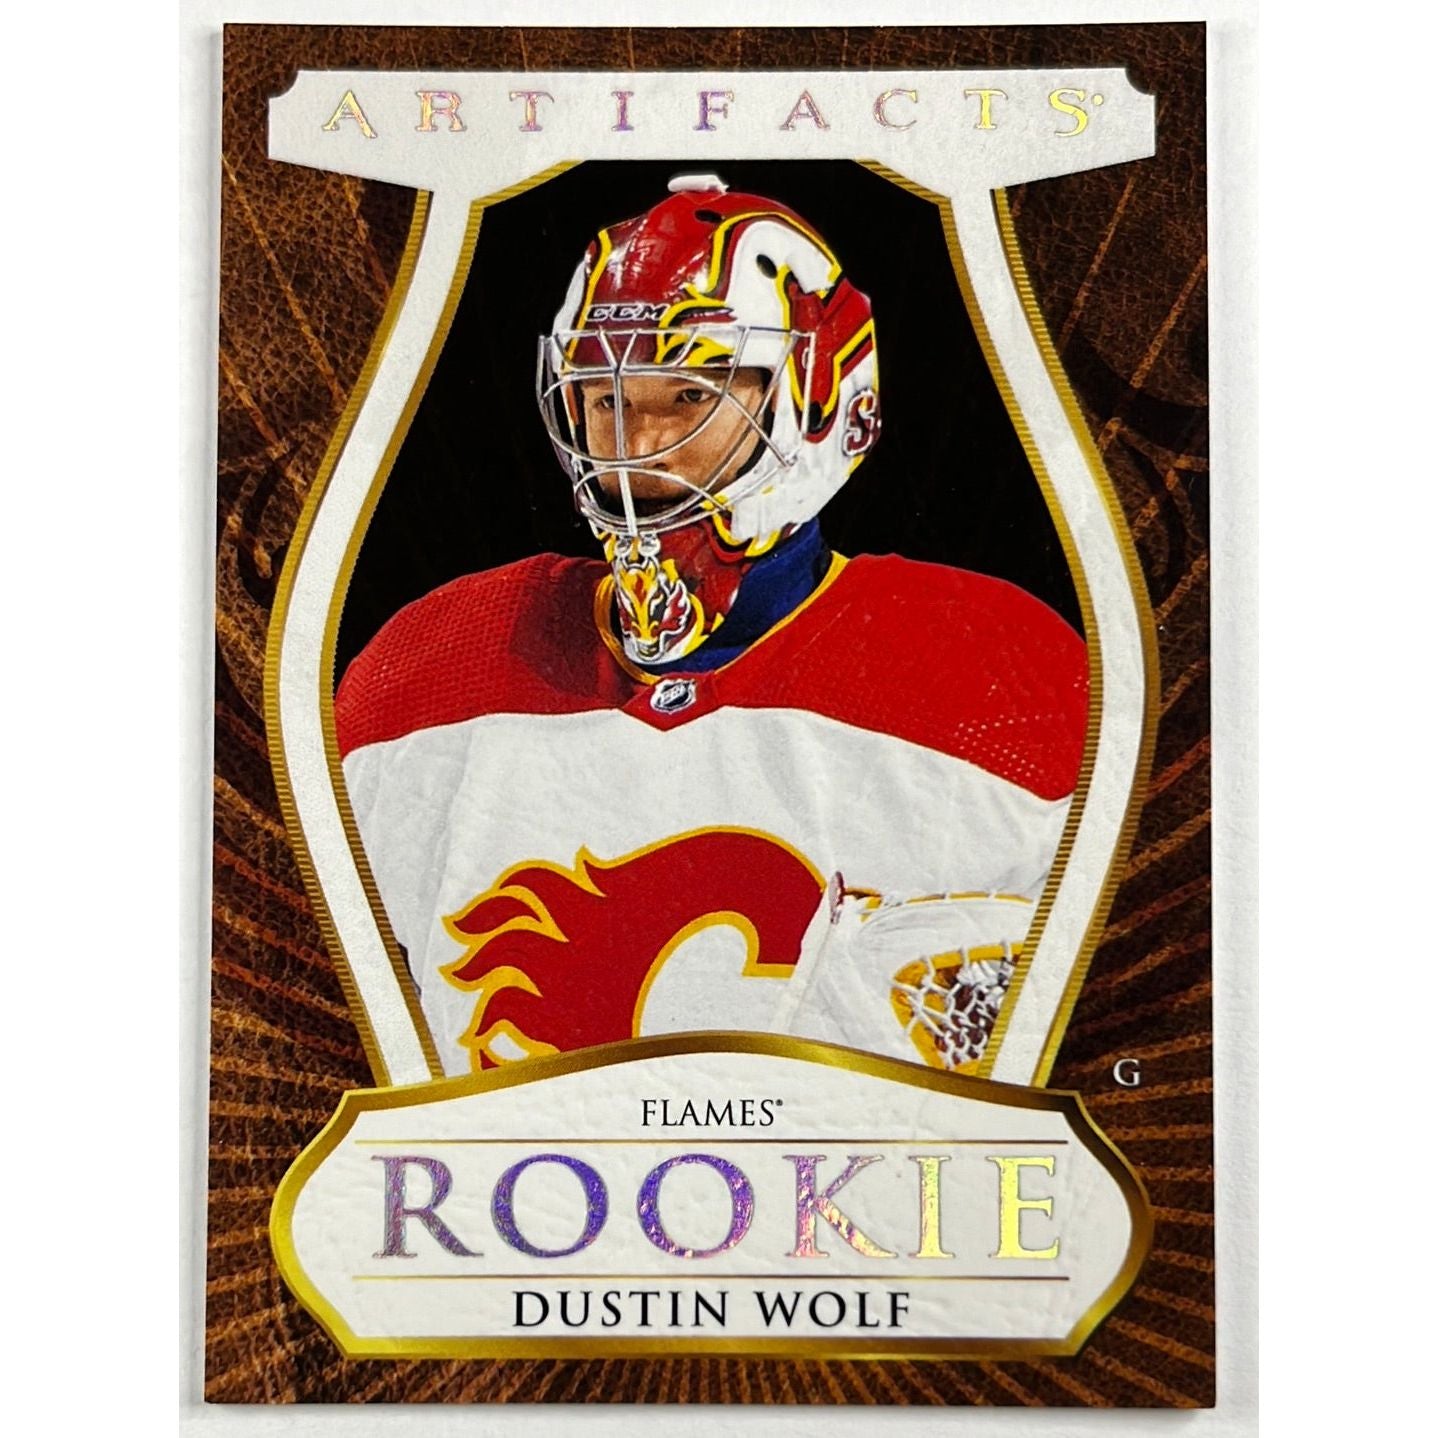 2023-24 Artifacts Dustin Wolf Leather Rookie